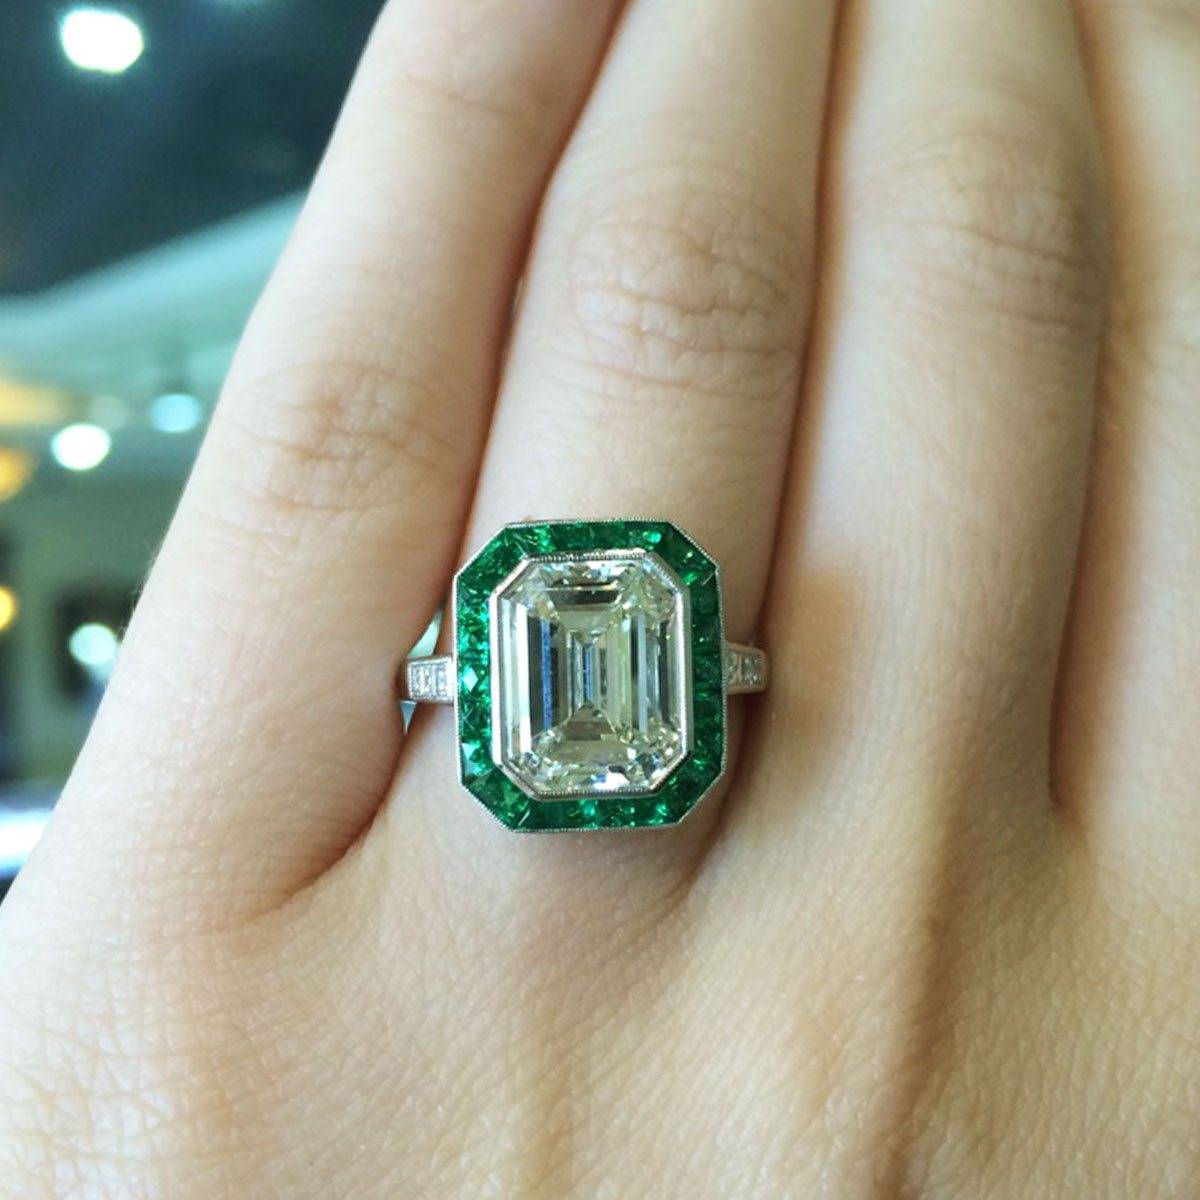 What's better than a double dose of emeralds? Emerald cut engagement ring with an emerald halo!